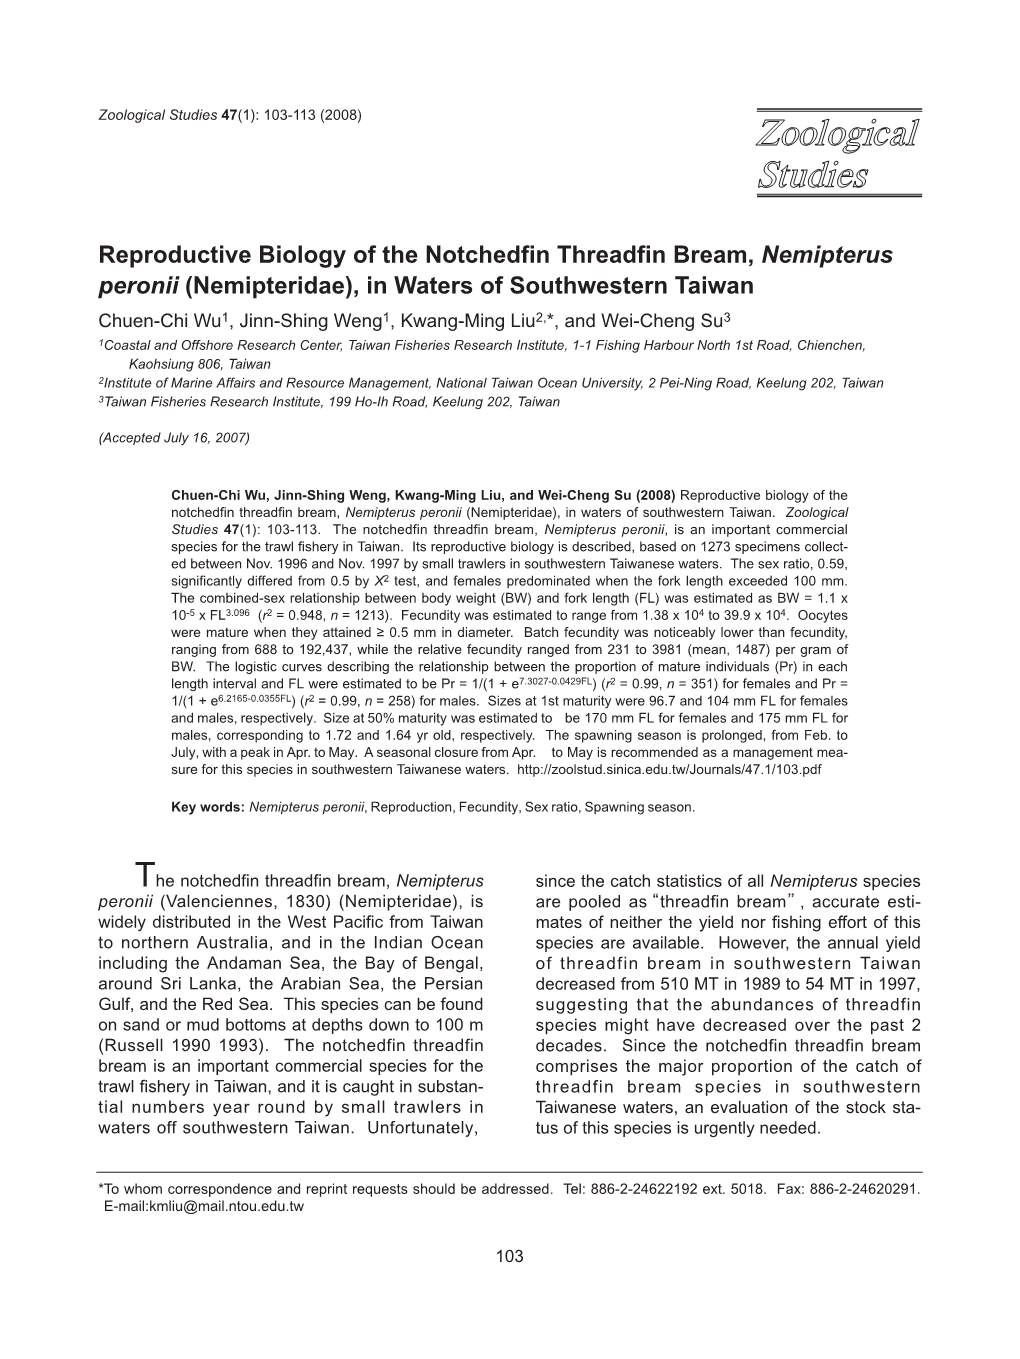 Reproductive Biology of the Notchedfin Threadfin Bream